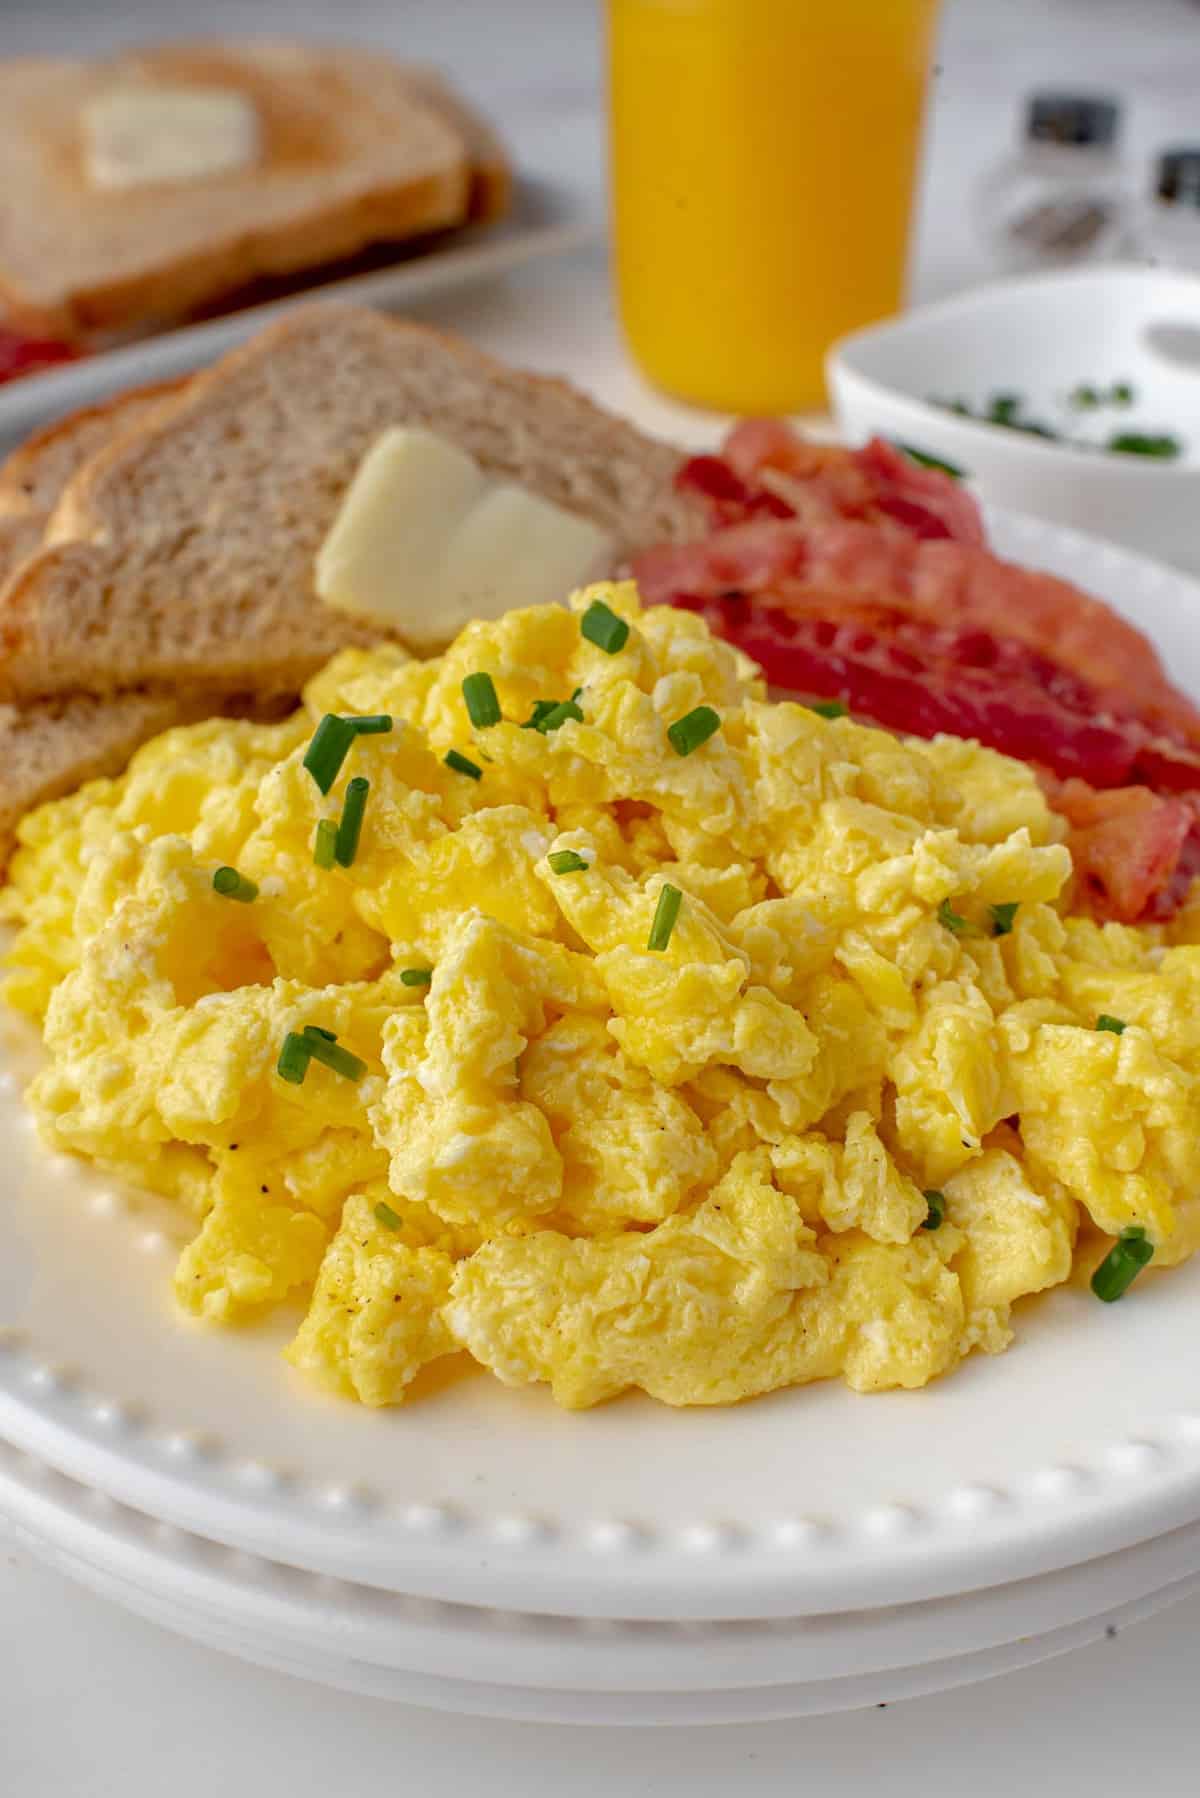 Scrambled eggs piled on a plate with bacon and toast.